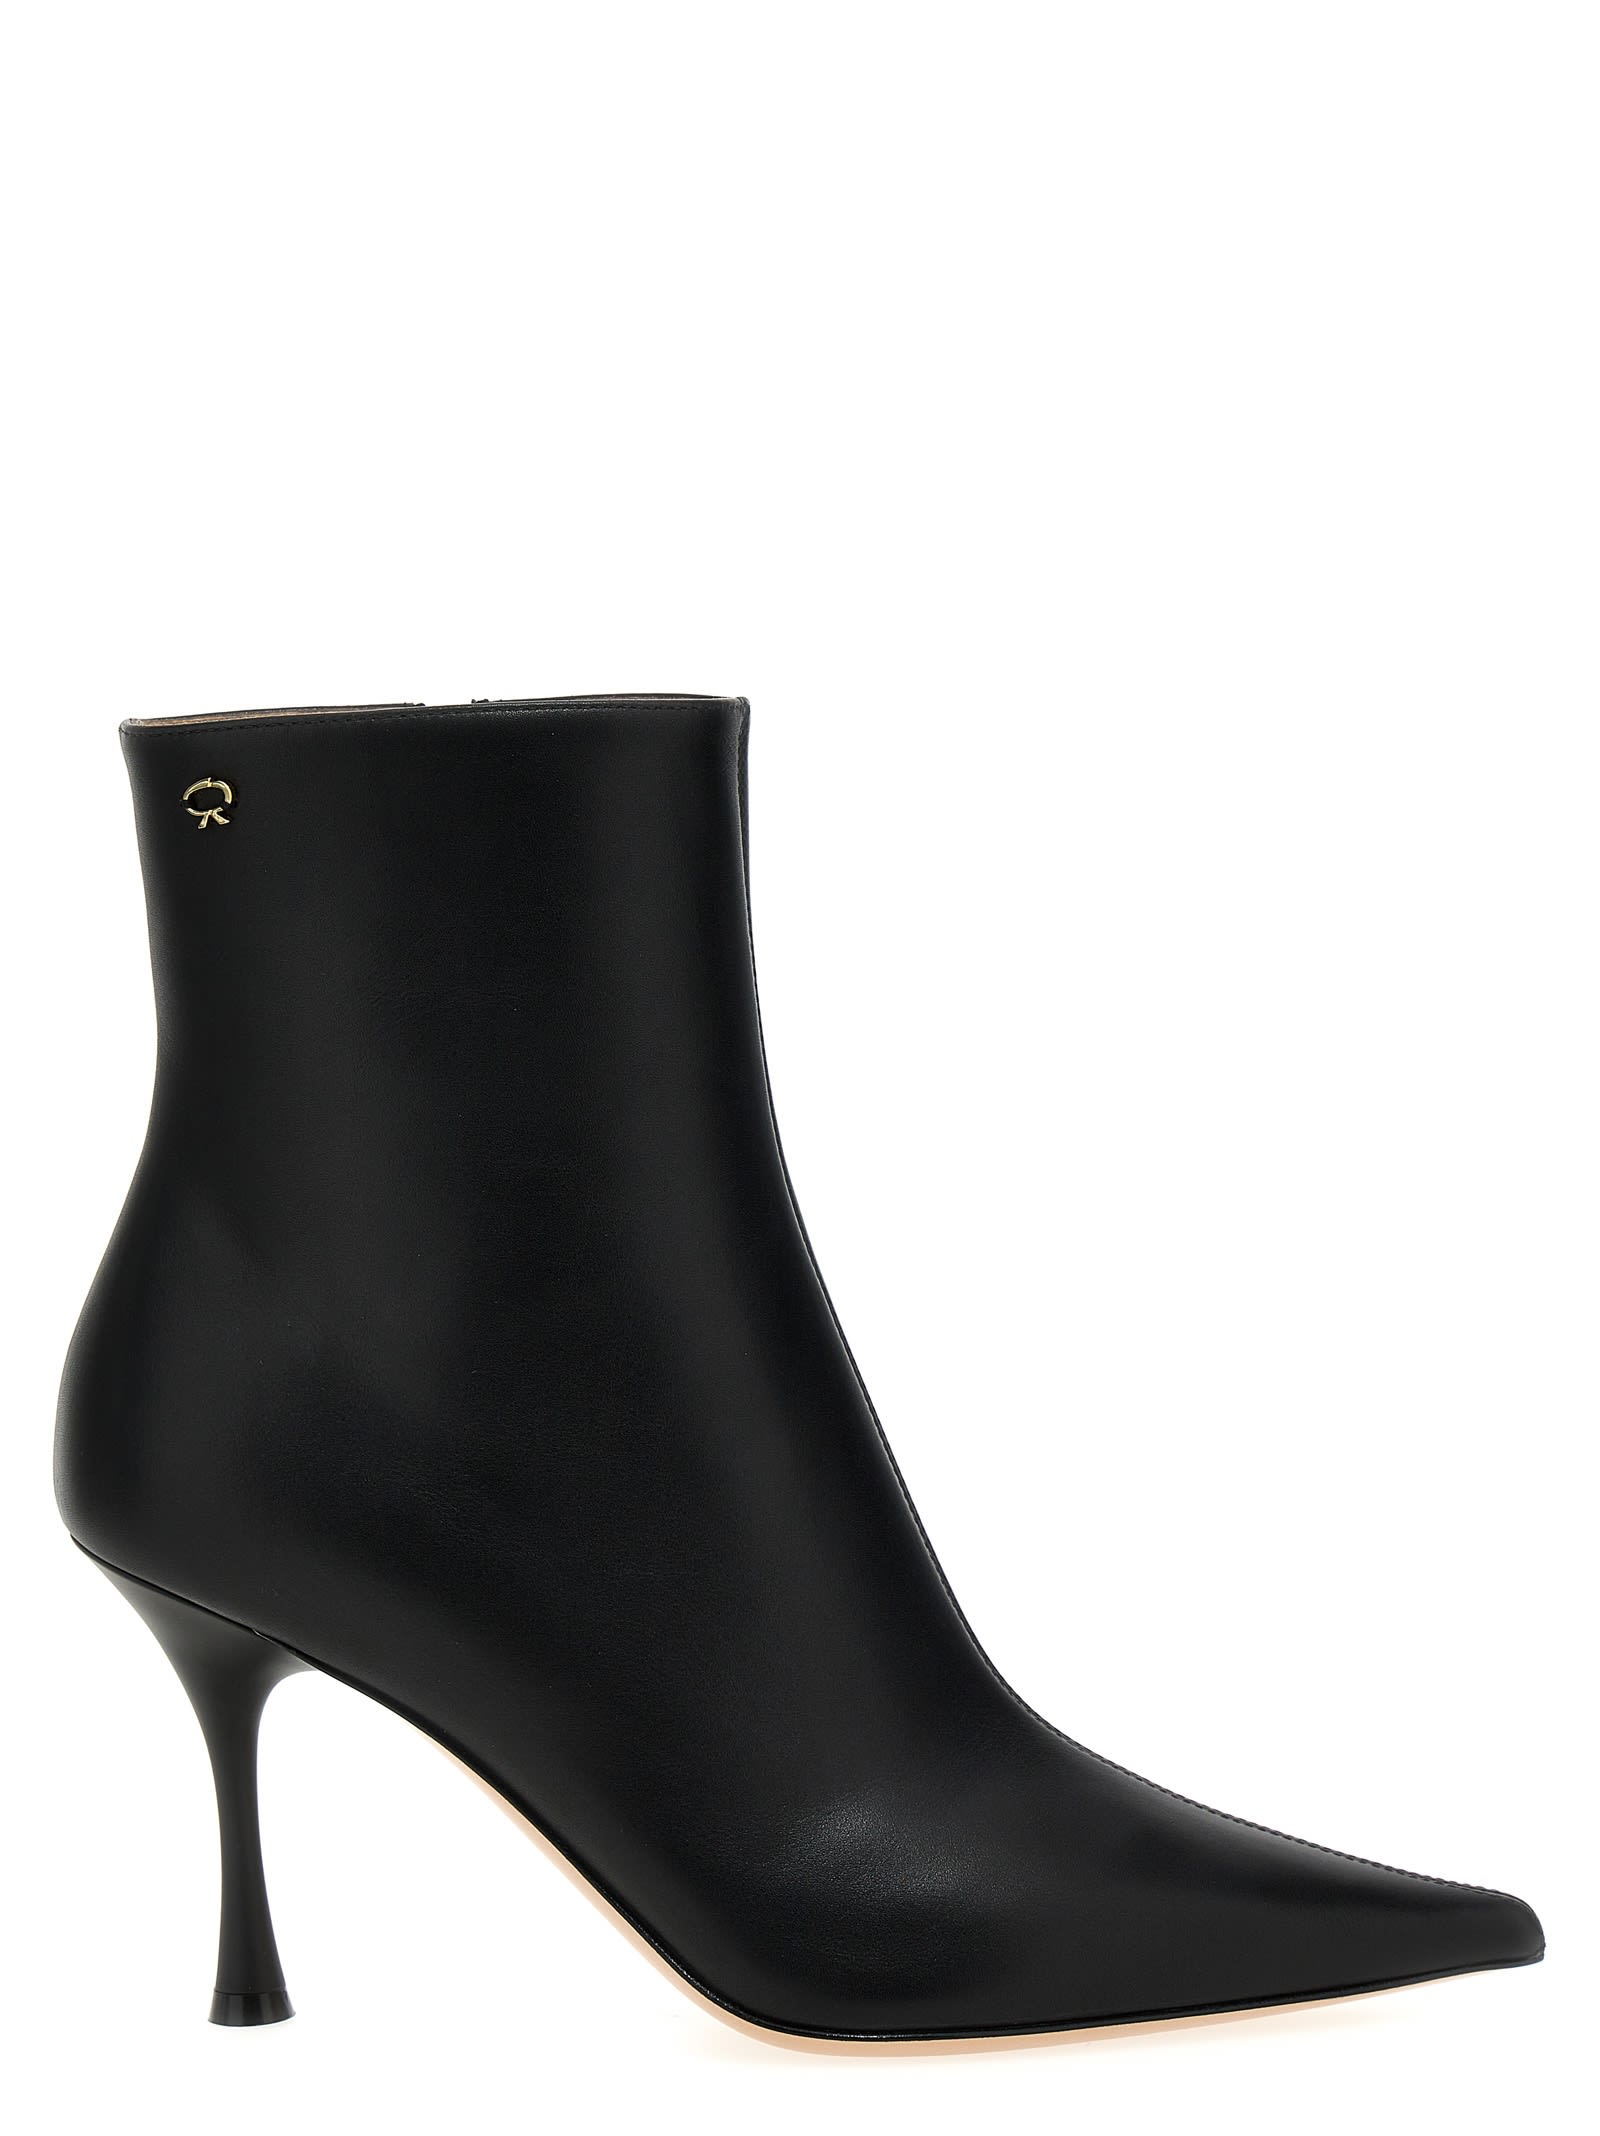 Gianvito Rossi Leather Ankle Boots In Black